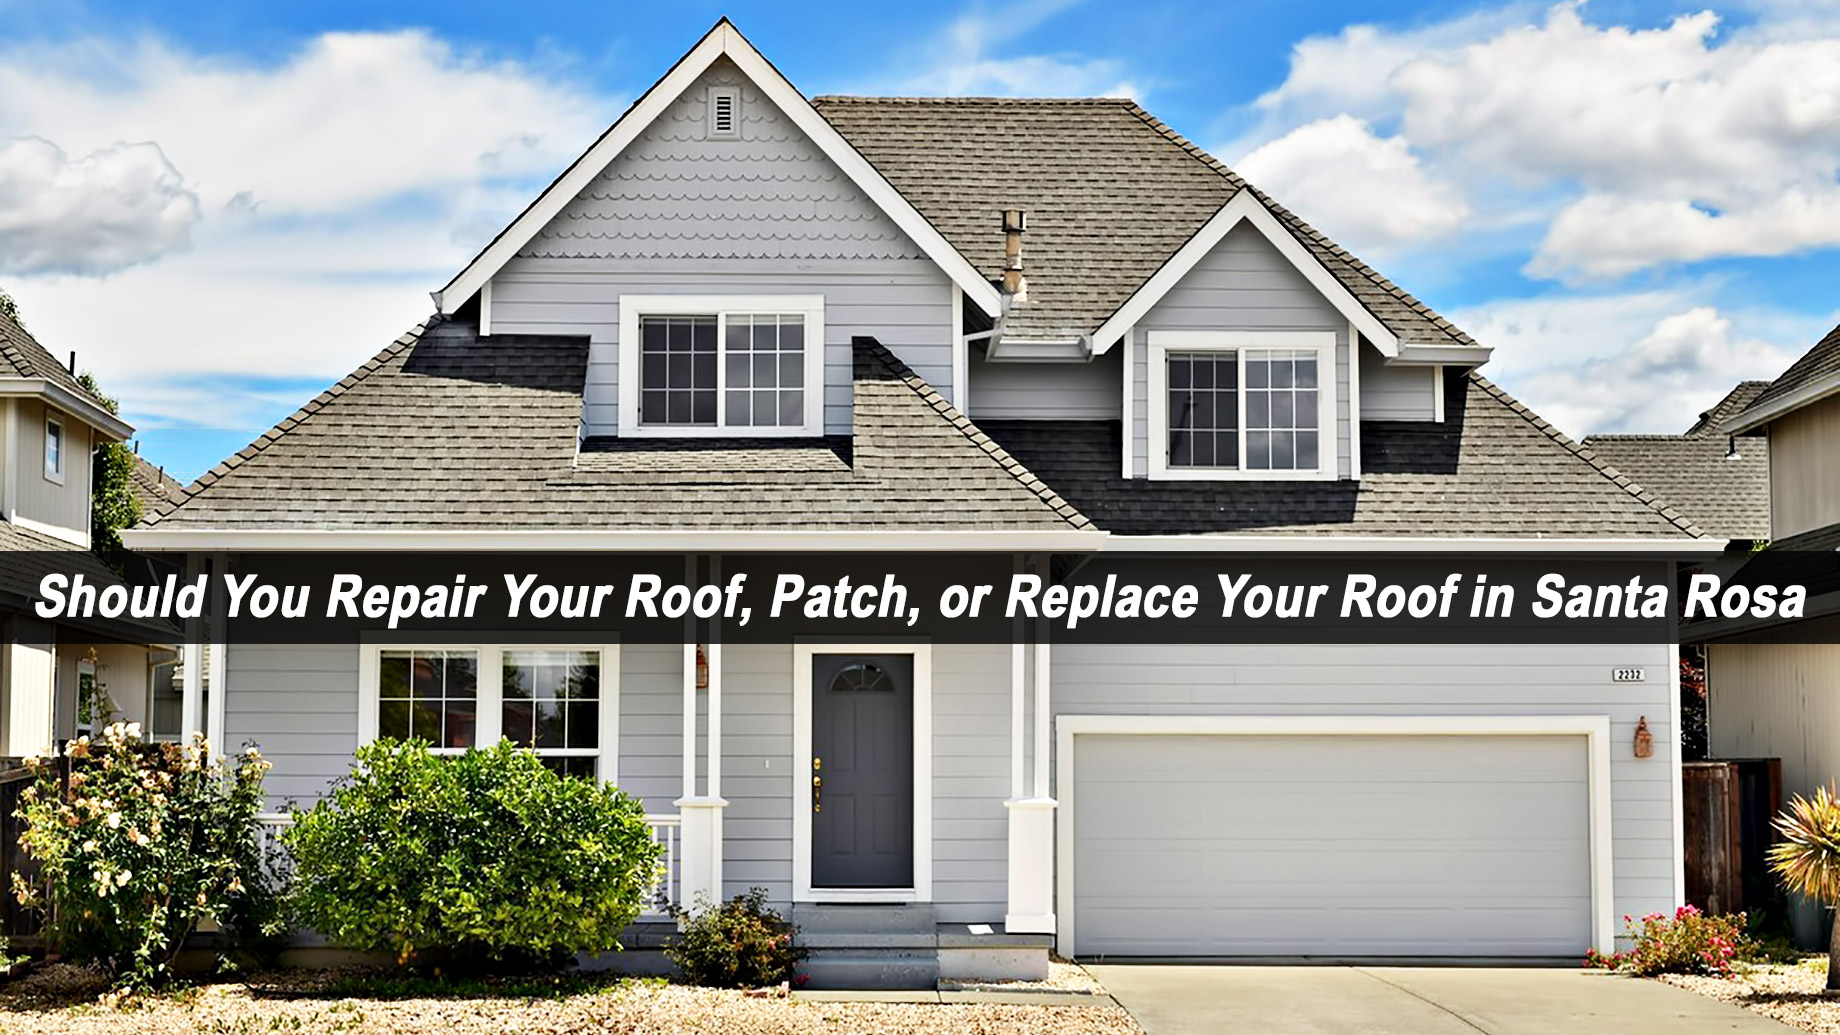 Should You Repair Your Roof, Patch, or Replace Your Roof in Santa Rosa, California